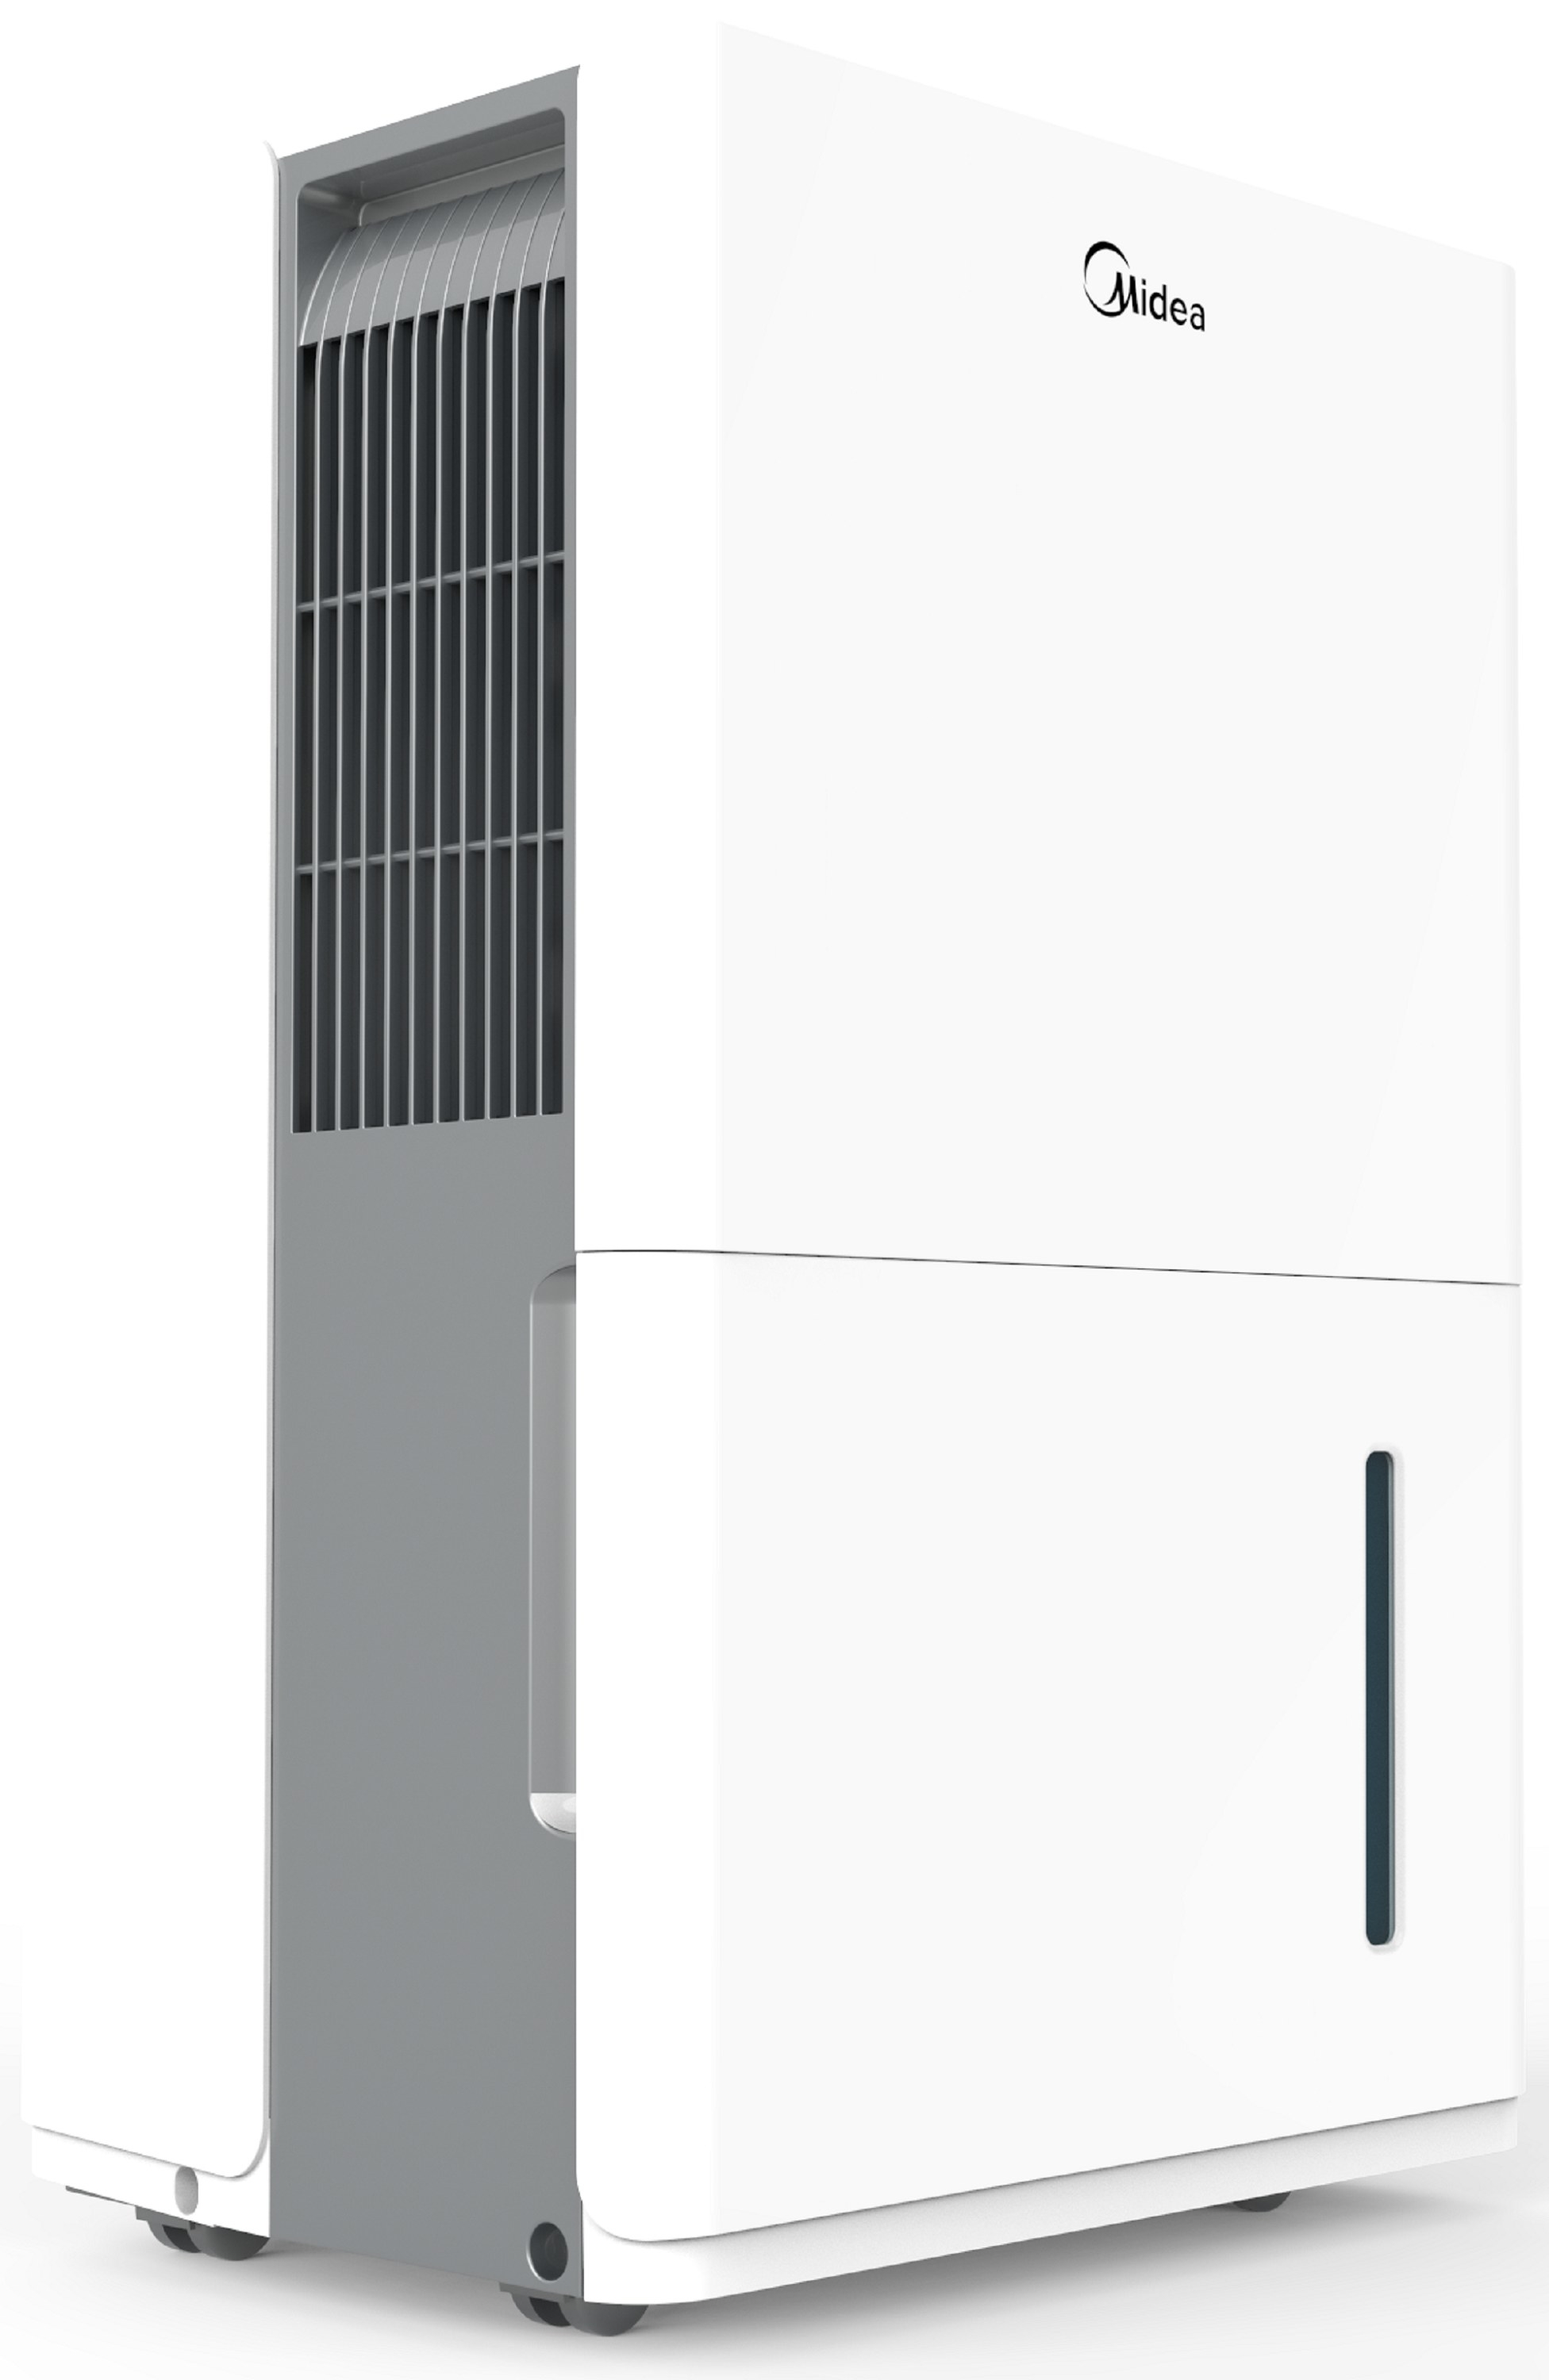 The white and gray dehumidifier